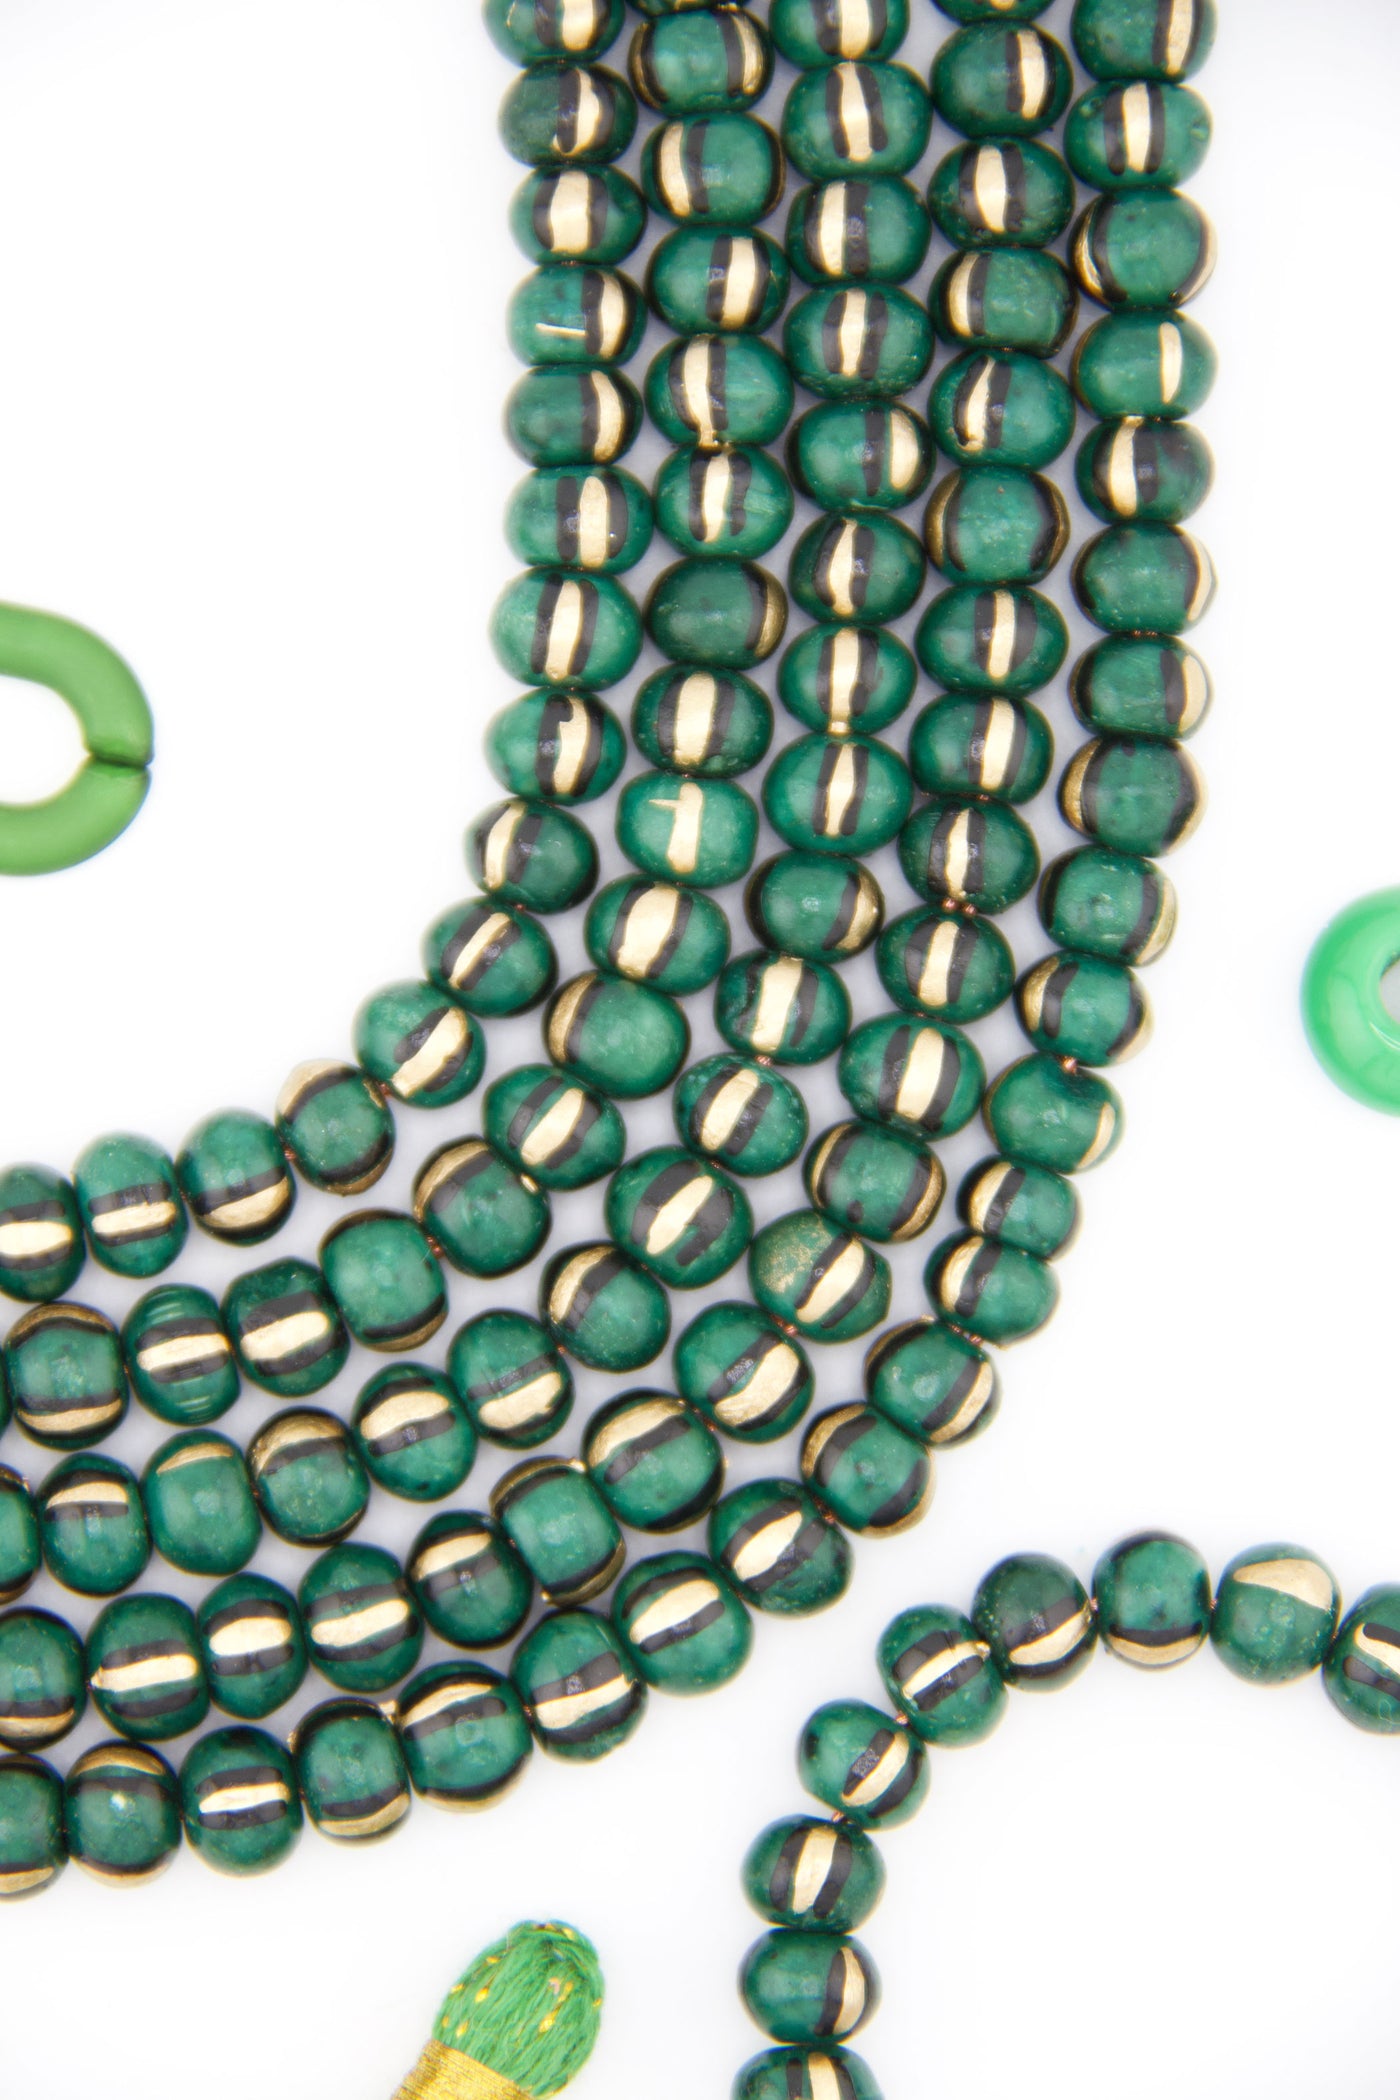 Green & Gold Hand Painted Rondelle Bone Beads, 9x7mm Spacer Beads for making DIY Jewelry 